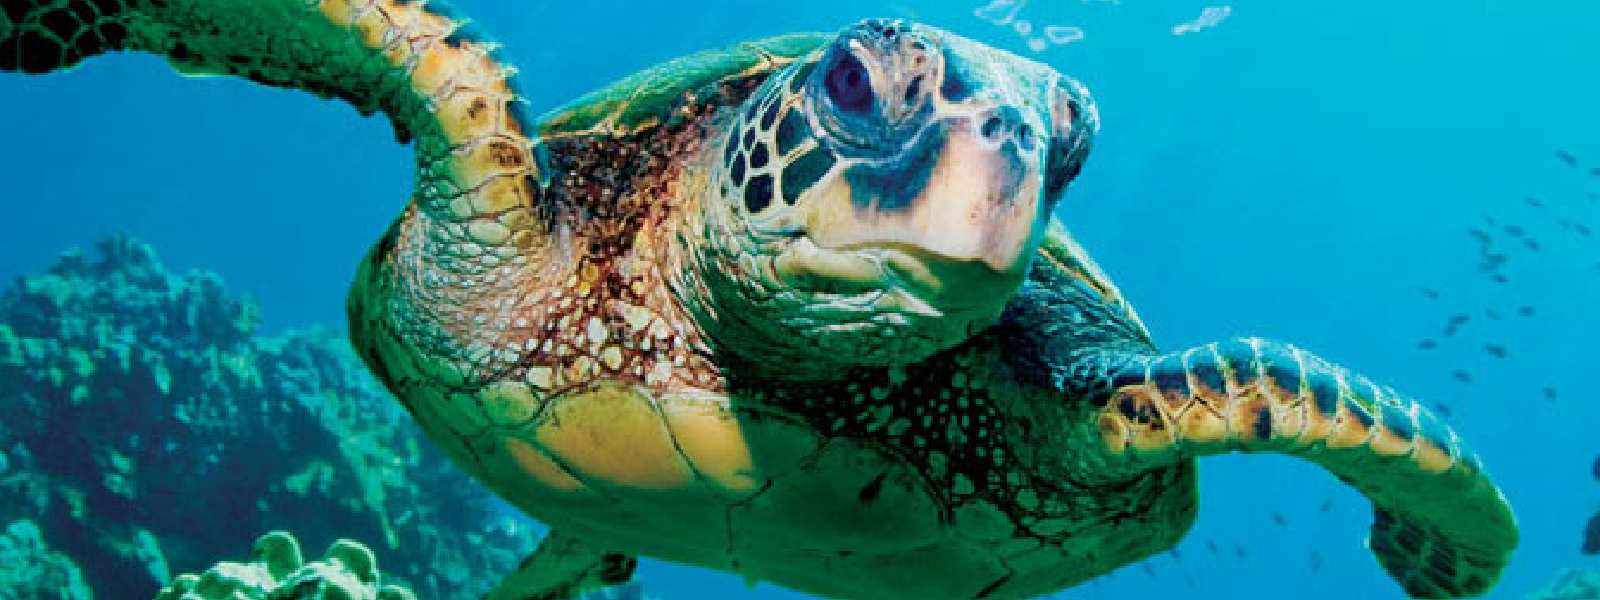 10 Sea Turtle carcasses recovered within days